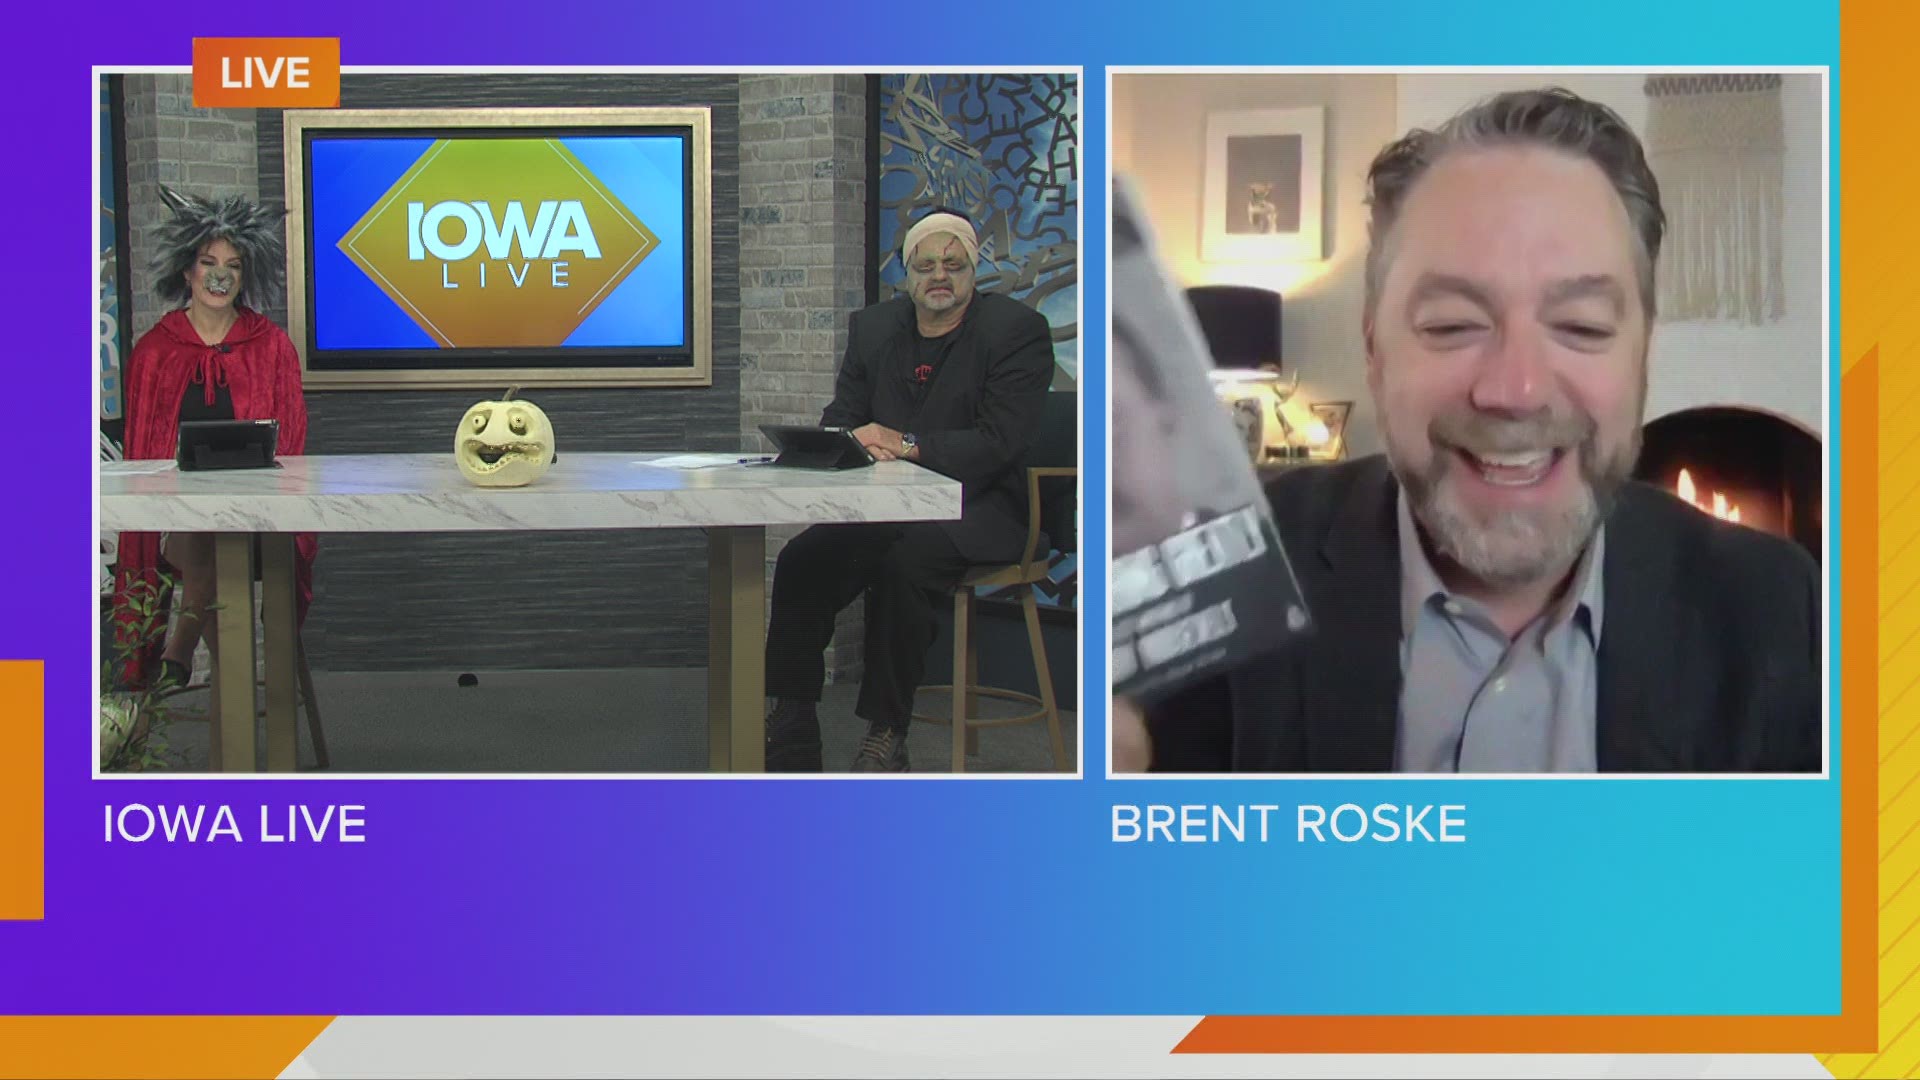 Brent Roske may have changed his prediction since he was on 'Iowa Live' last month